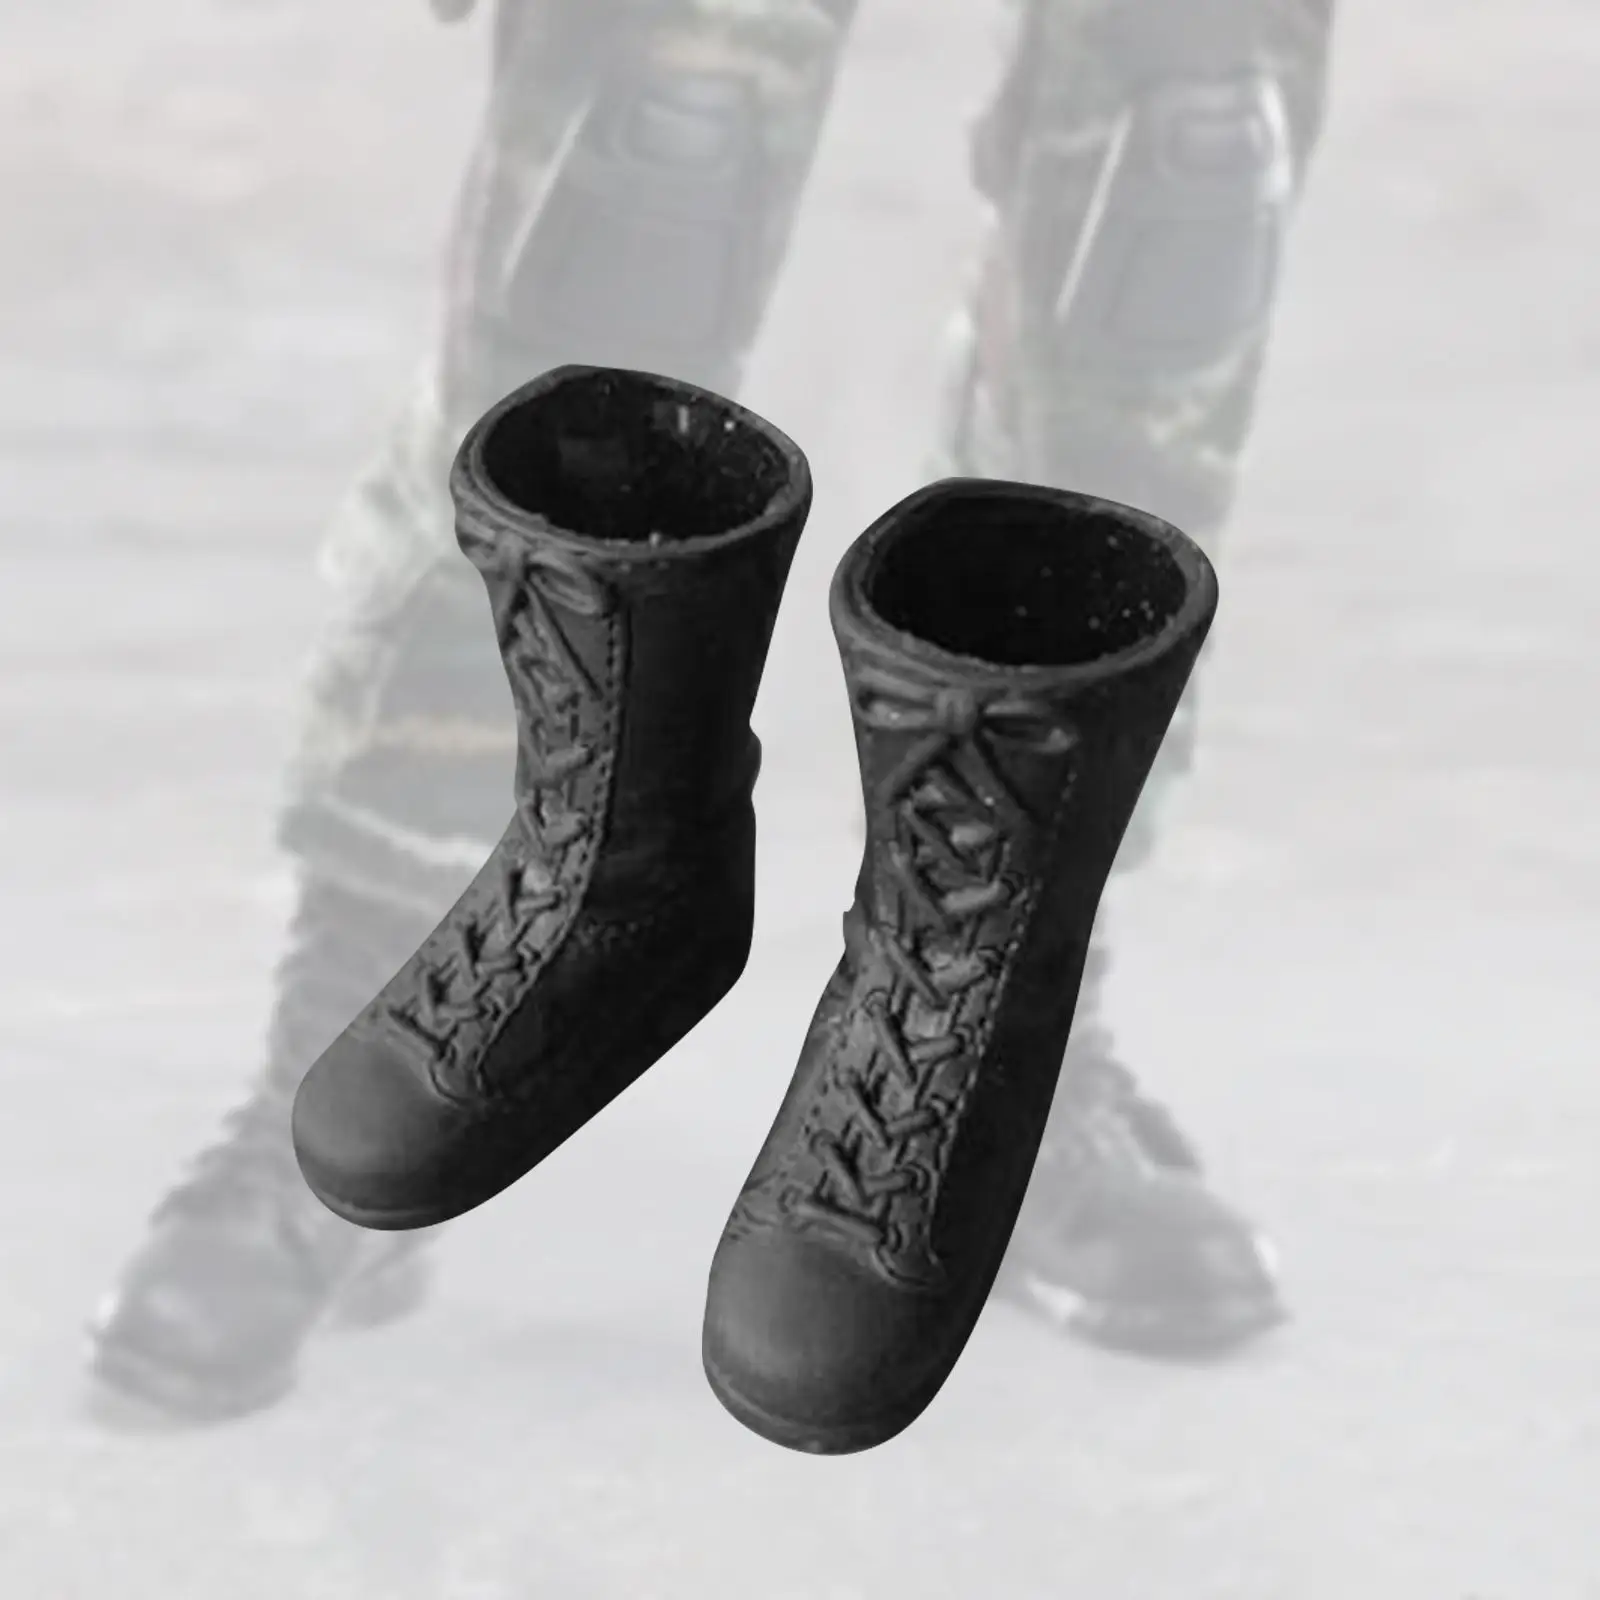 1/6 Scale Mid Calf Boots Miniature Soldier Costume for 12`` Action Figures